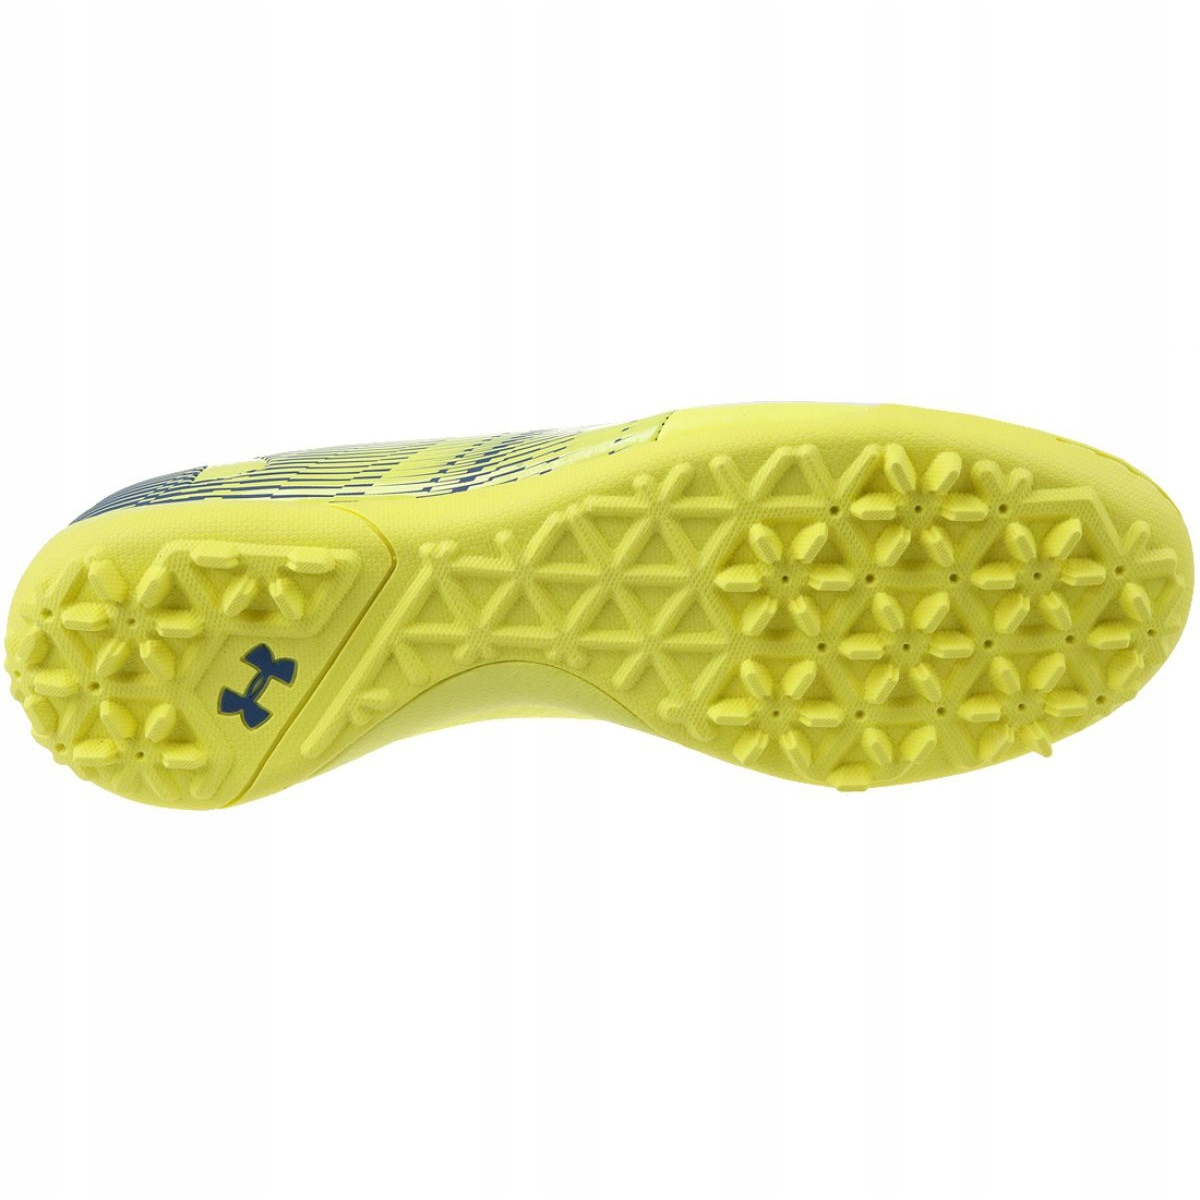 under armor yellow shoes